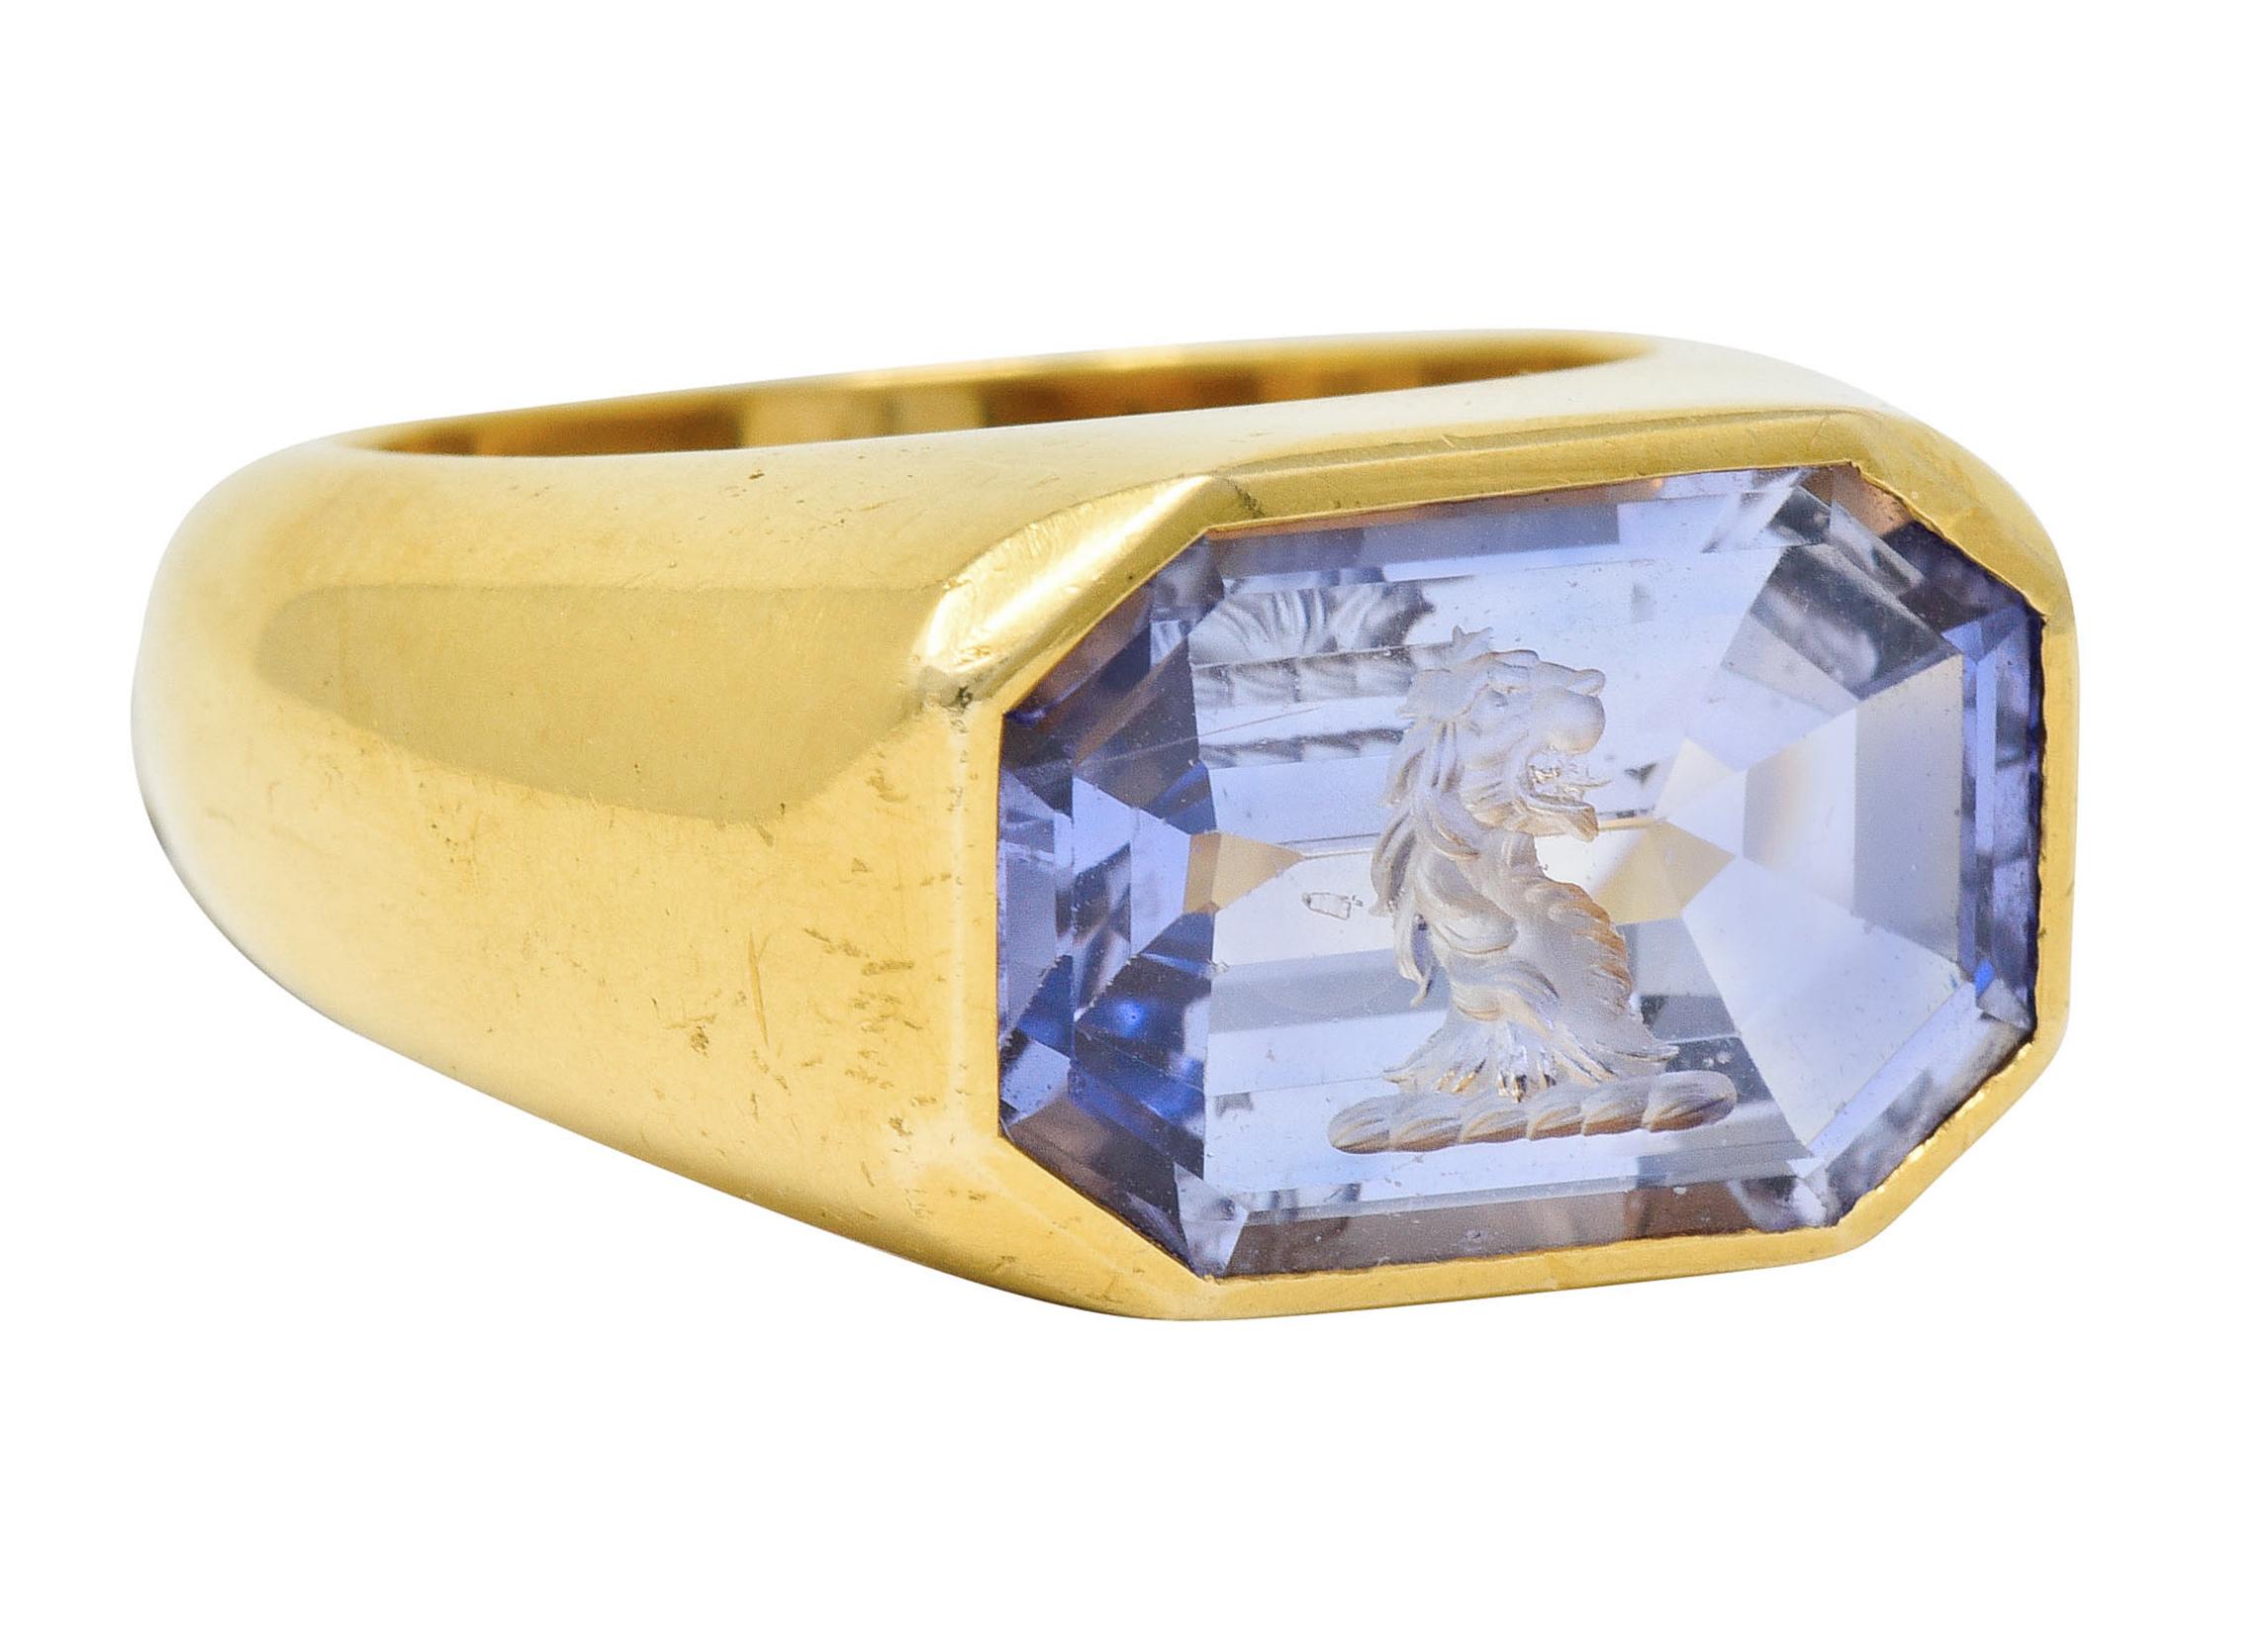 Centering an octagonal cut sapphire weighing approximately 13.10 carats

Exhibiting color-change with bluish-violet color in fluorescent light and purple under incandescent light

Bezel set and deeply carved to depict a roaring lion

Tested as 22